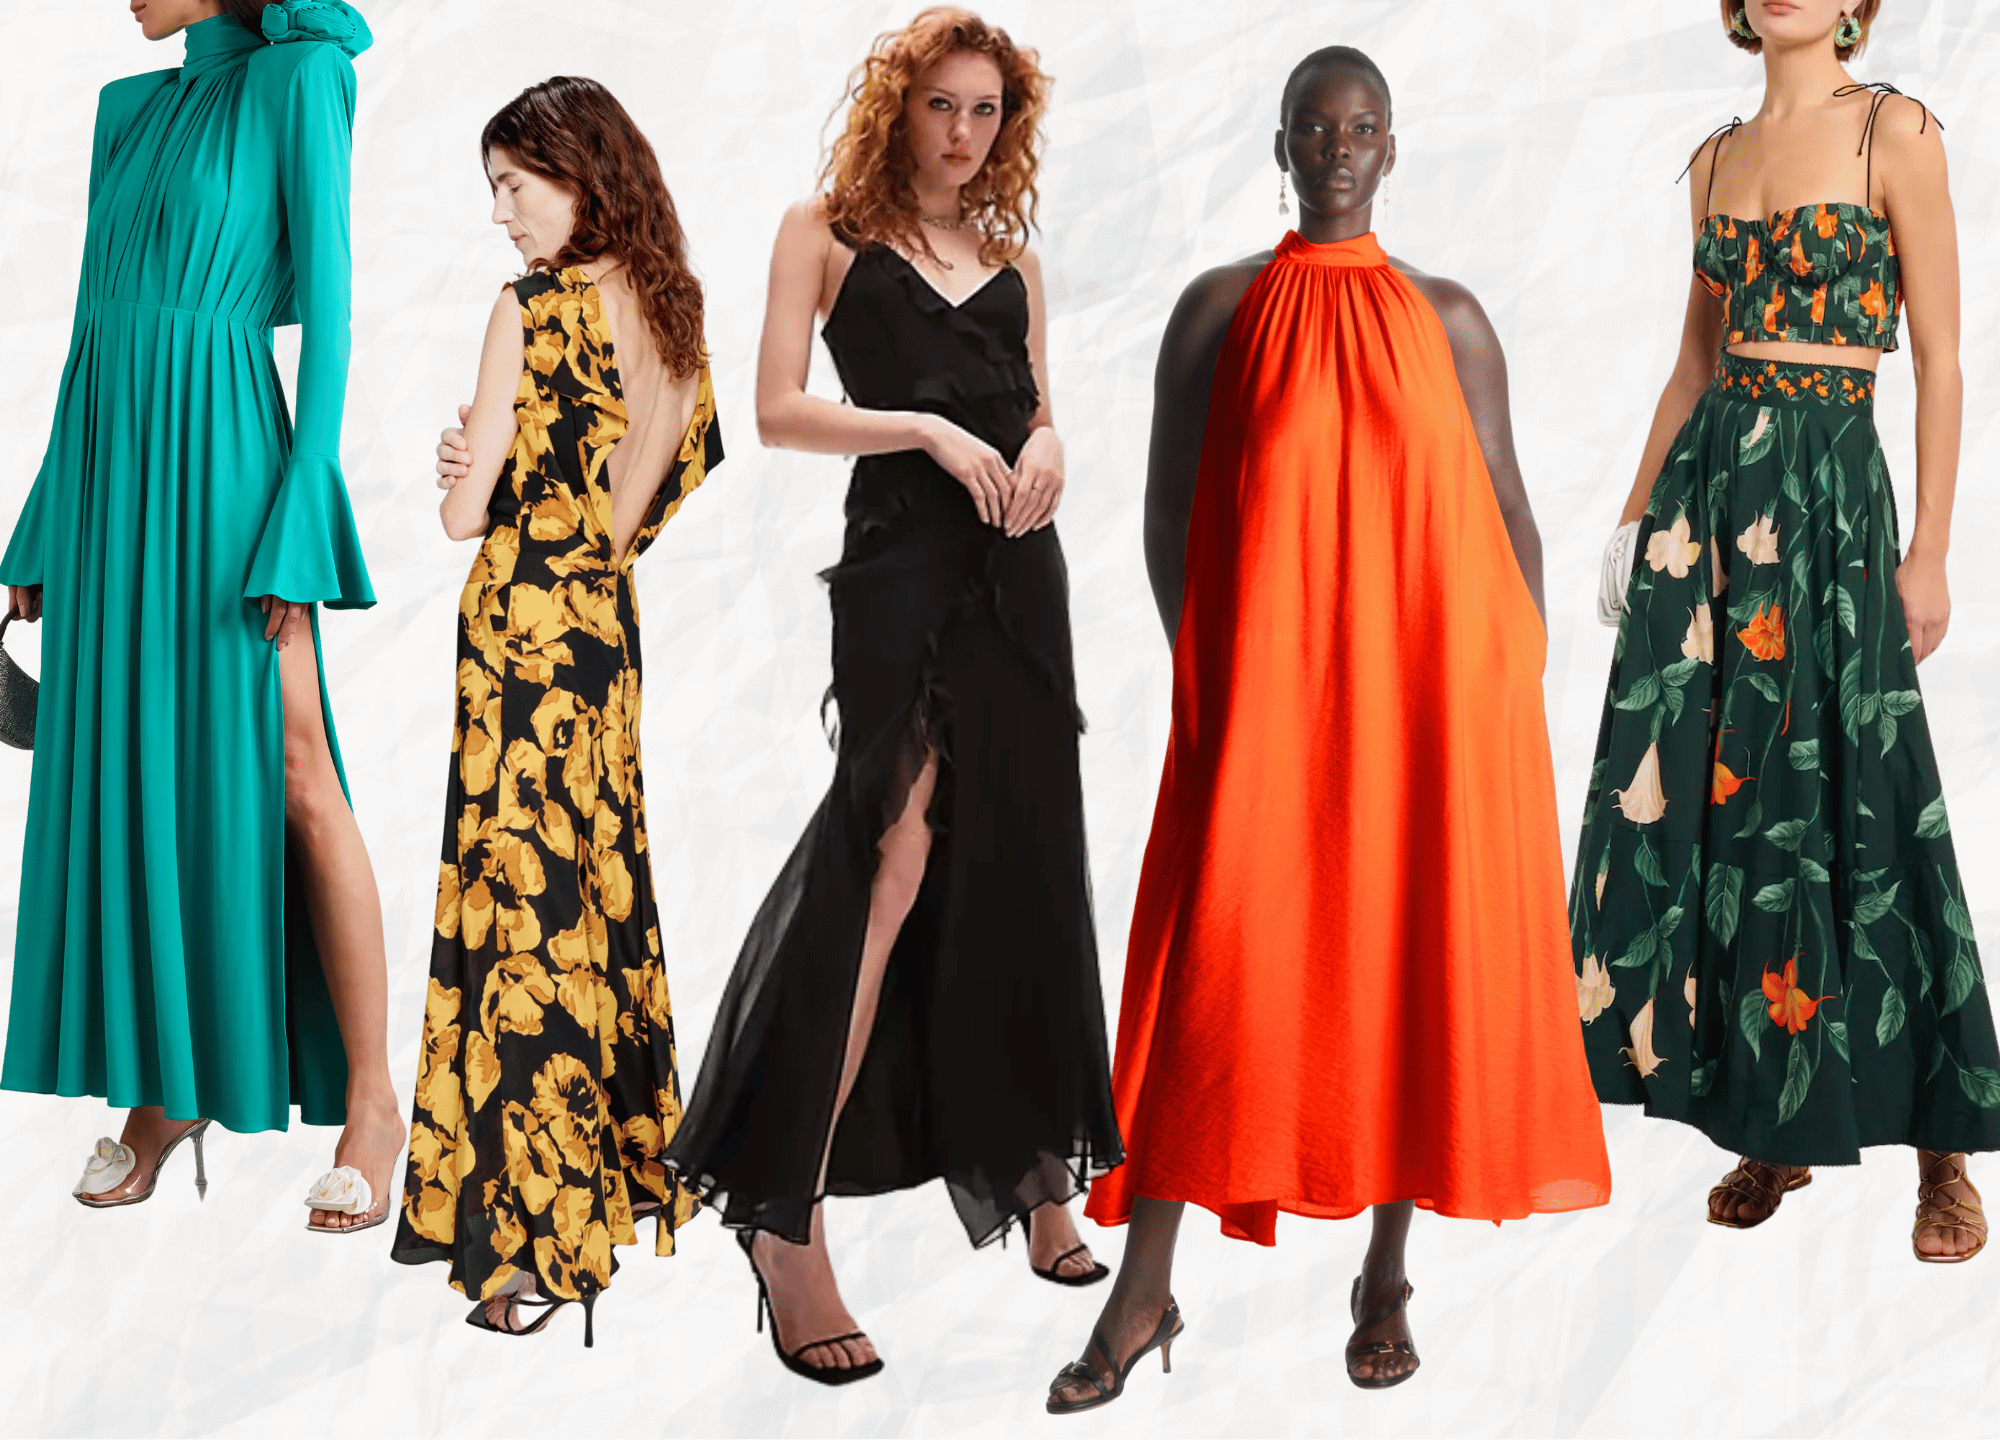 The 2023 Wedding Guest Outfits to Try This Spring/Summer - Found